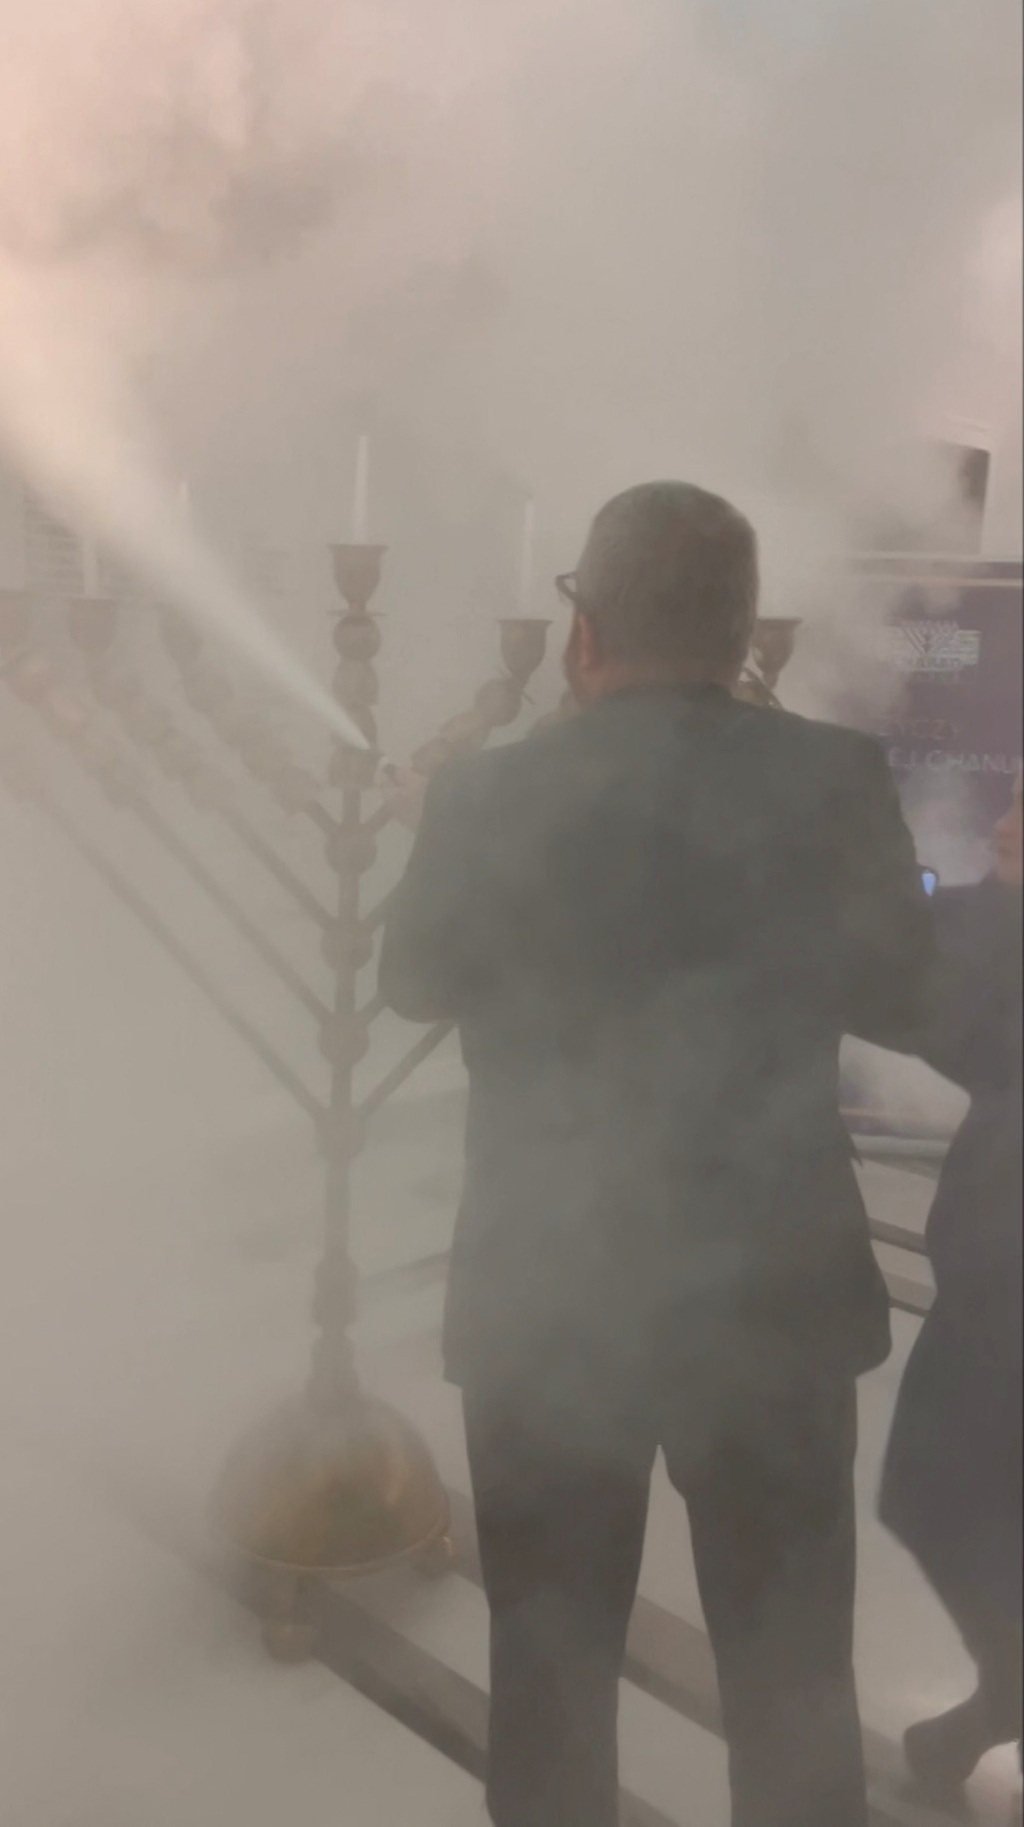 Polish lawmaker Grzegorz Braun holds a fire extinguisher to put out Hanukkah candles at the parliament in Warsaw on Tuesday. Photo: TVN24 via Reuters